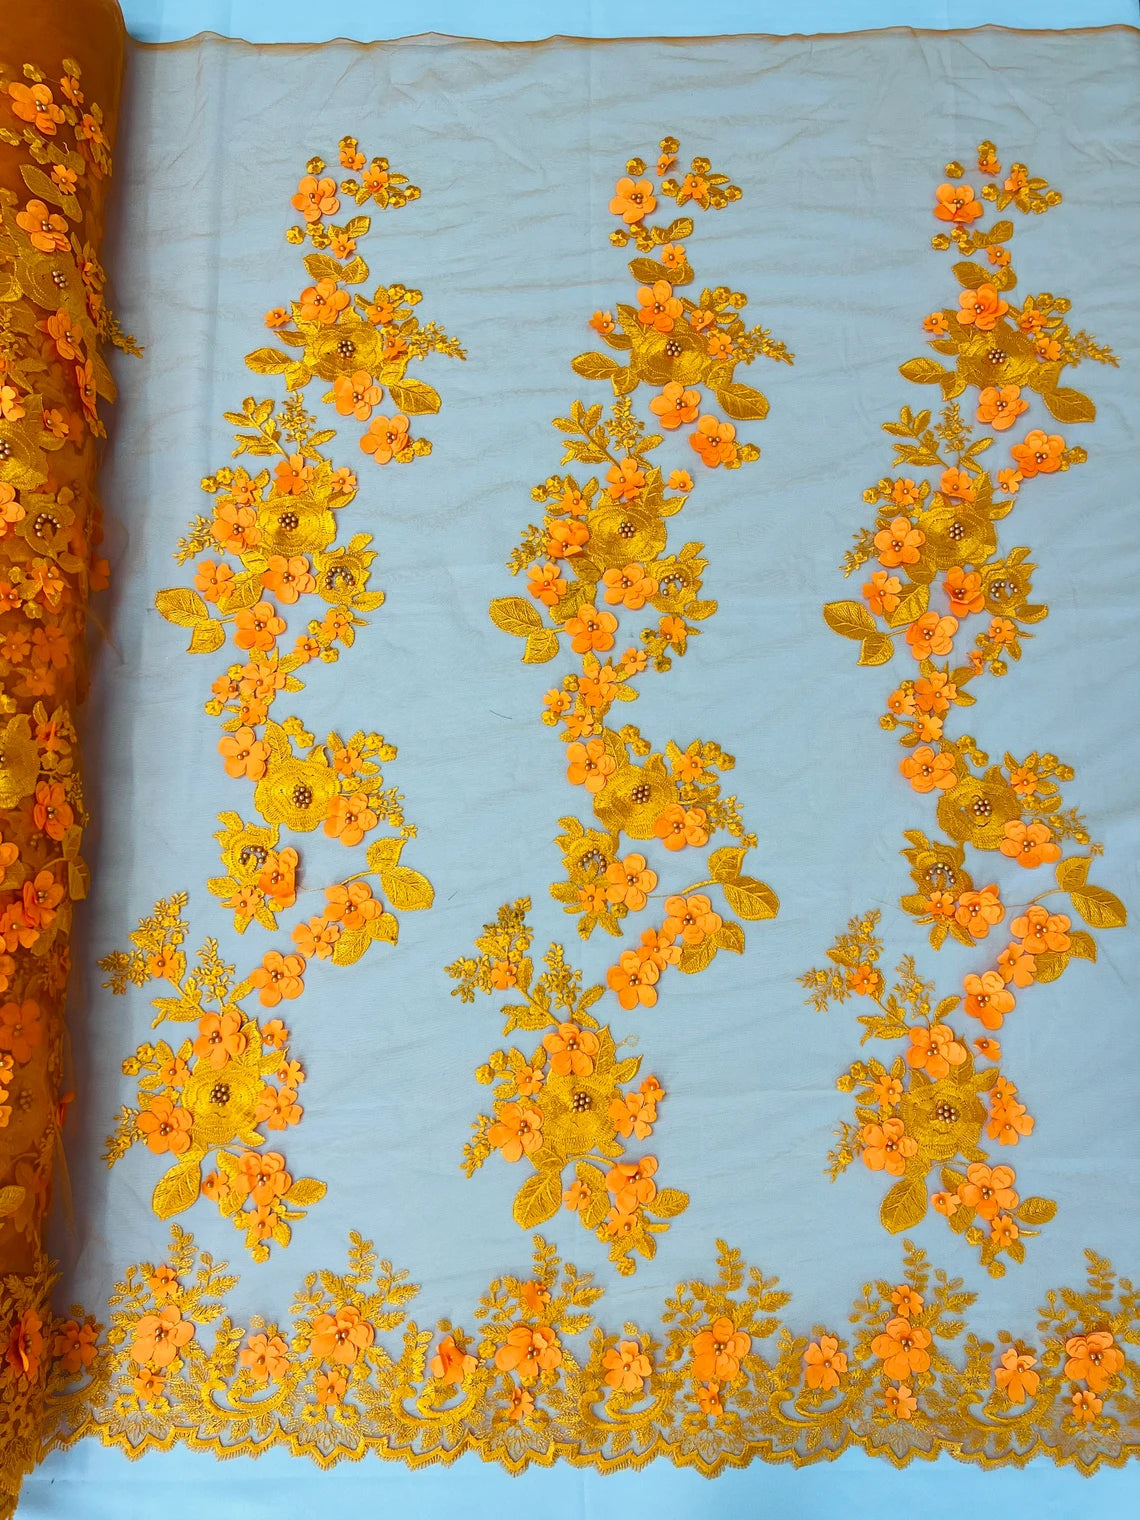 3D Flower Panels Fabric - Orange - Flower Panels Bead Embroidered on Lace Fabric Sold By Yard